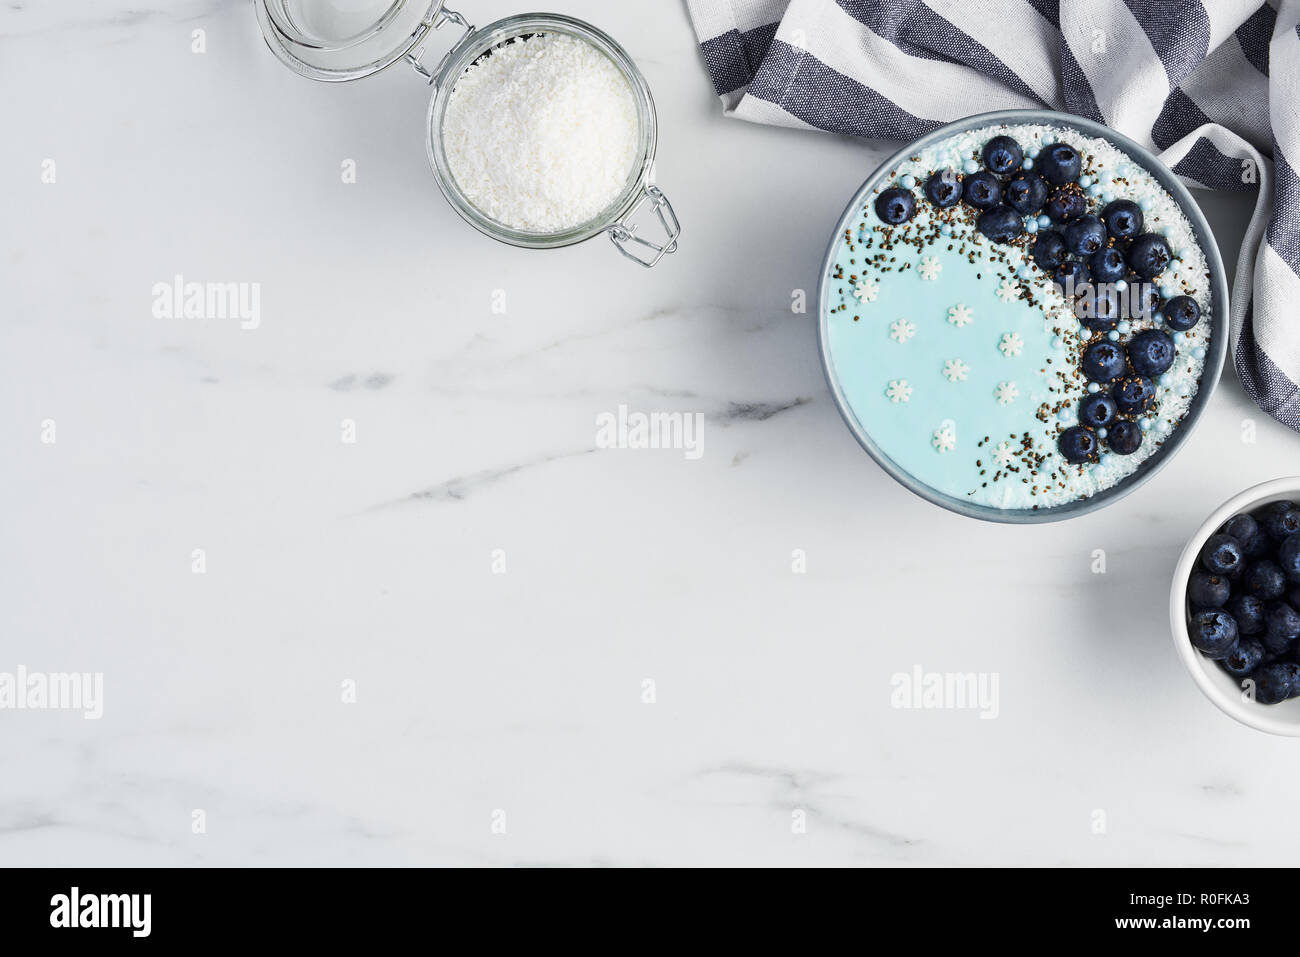 Top view of blue yogurt smoothie bowl made with blueberry, coconut flour, chia seeds and sugar pearls on white marble table with copy space. Stock Photo